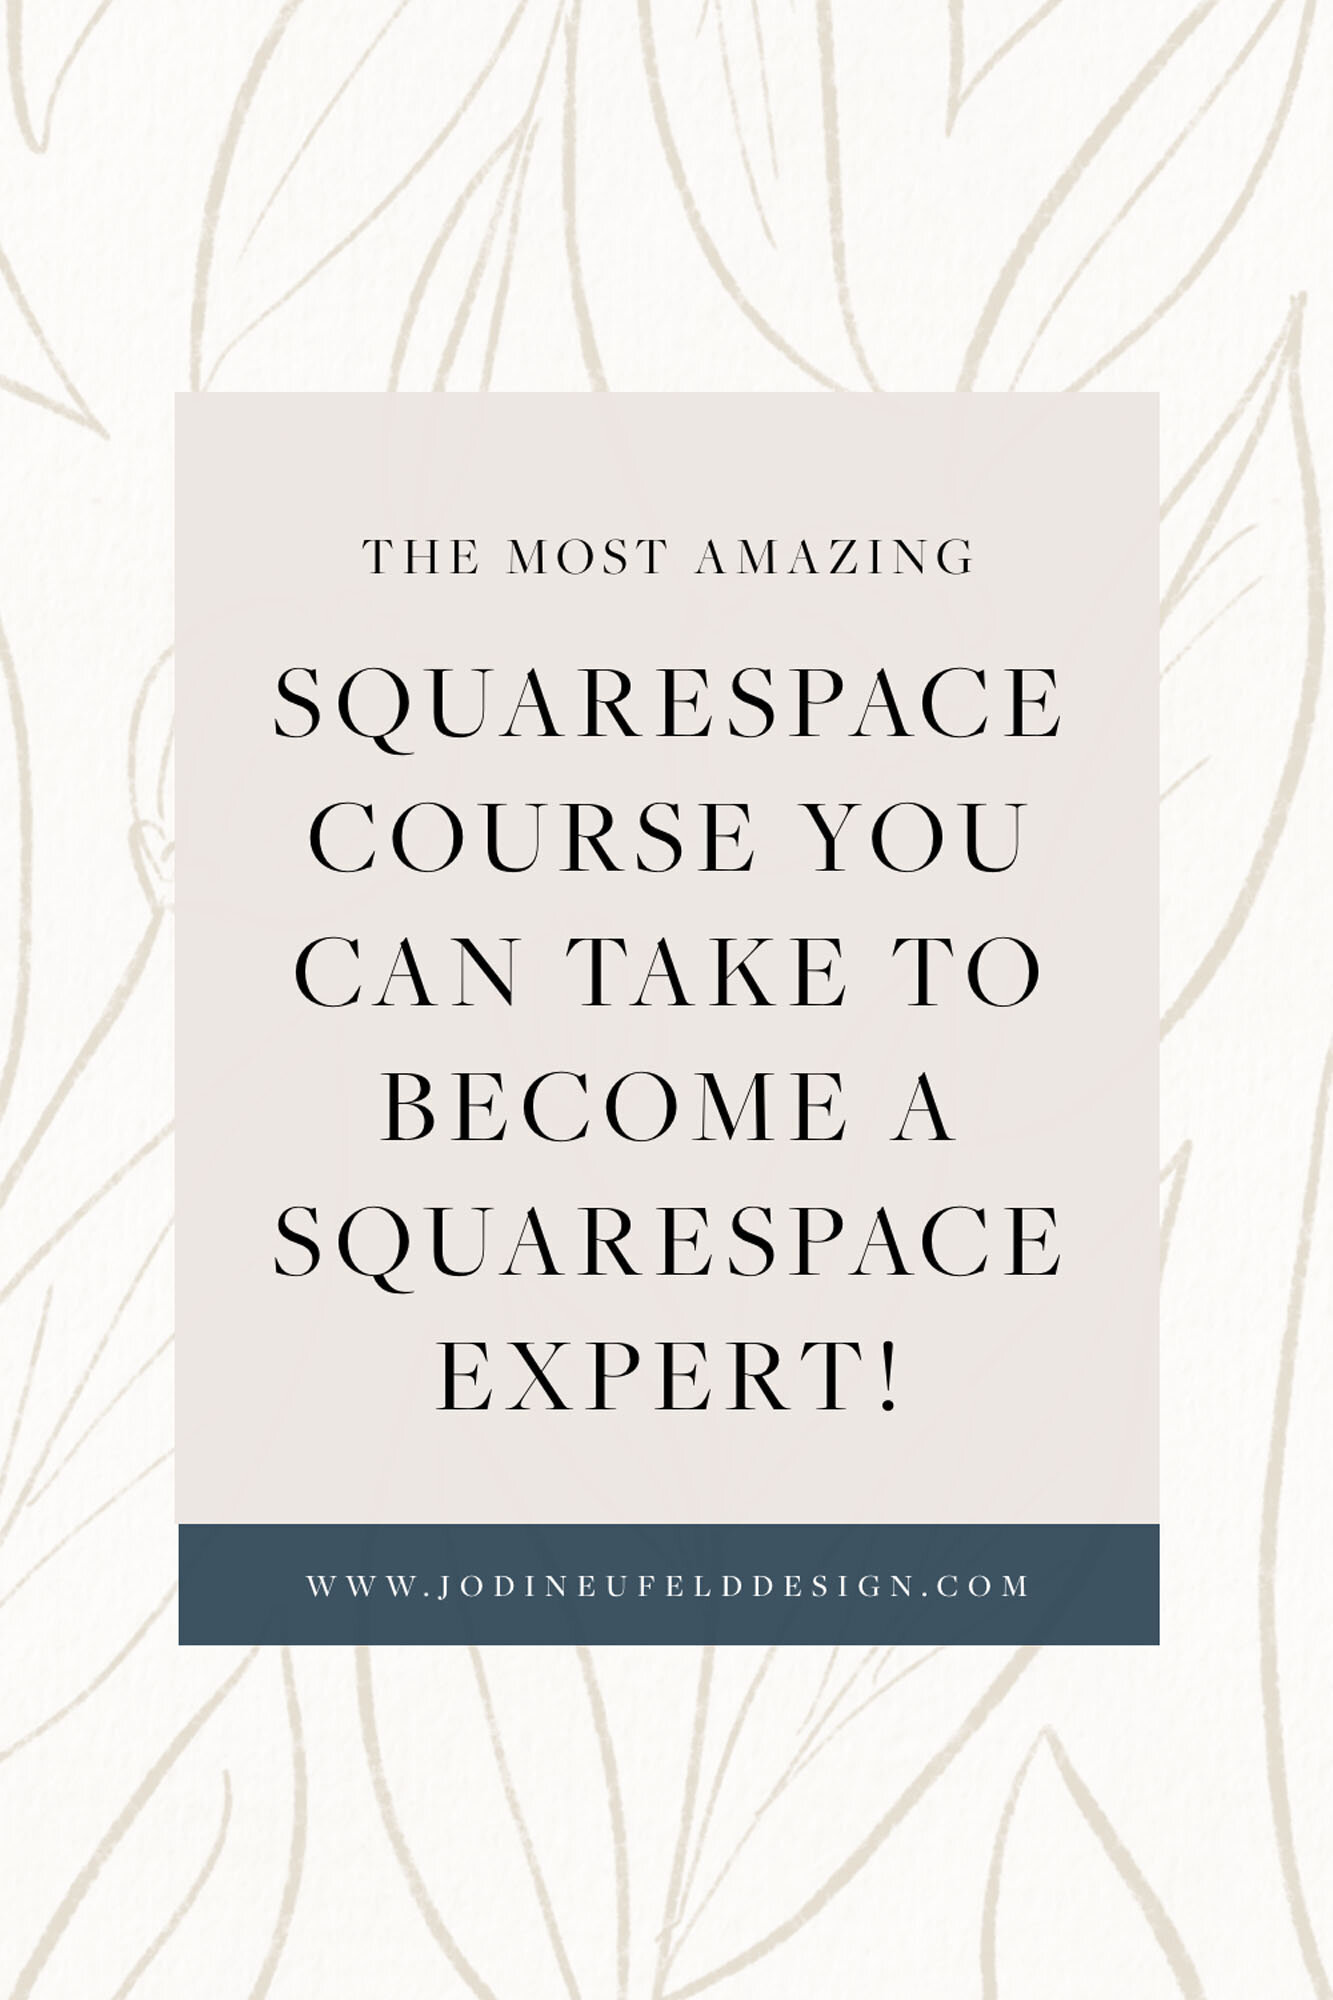 The most amazing course for learning Squarespace by Jodi Neufeld Design